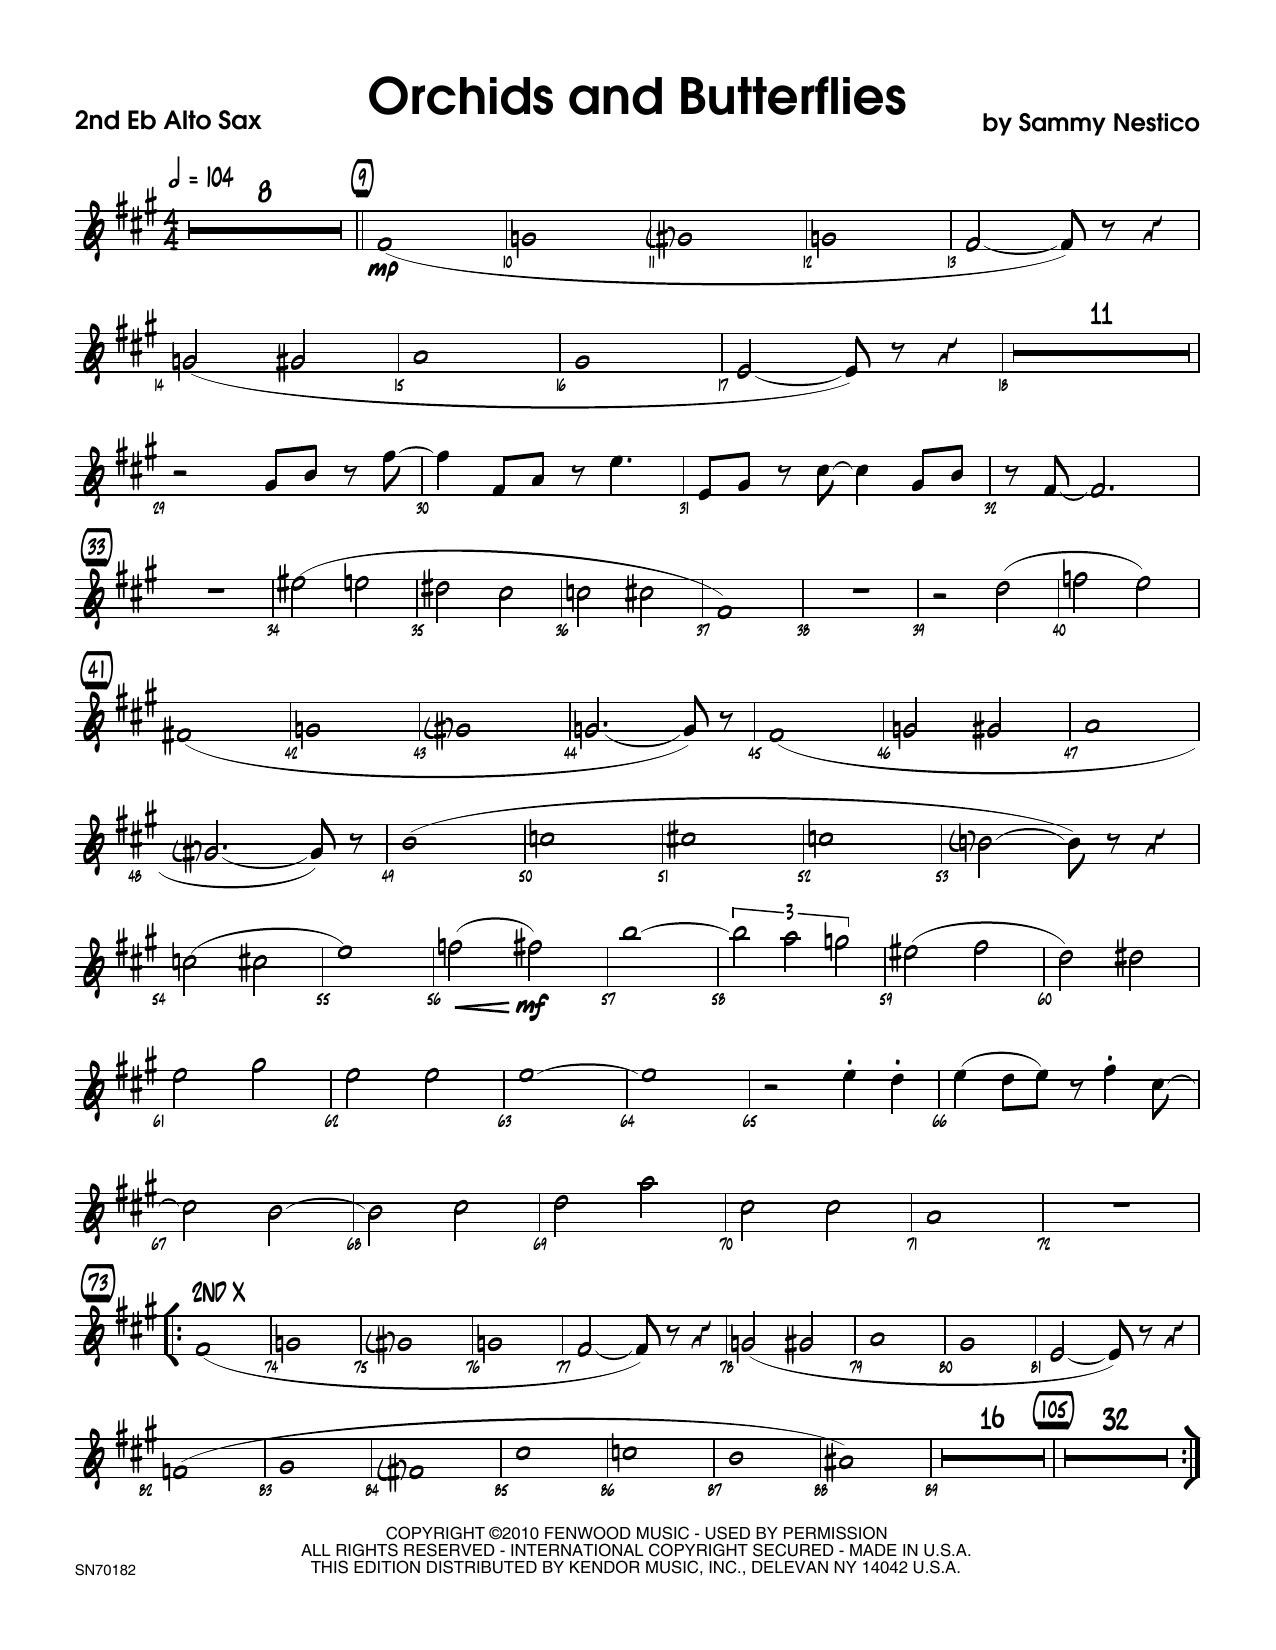 Download Sammy Nestico Orchids And Butterflies - 2nd Eb Alto S Sheet Music